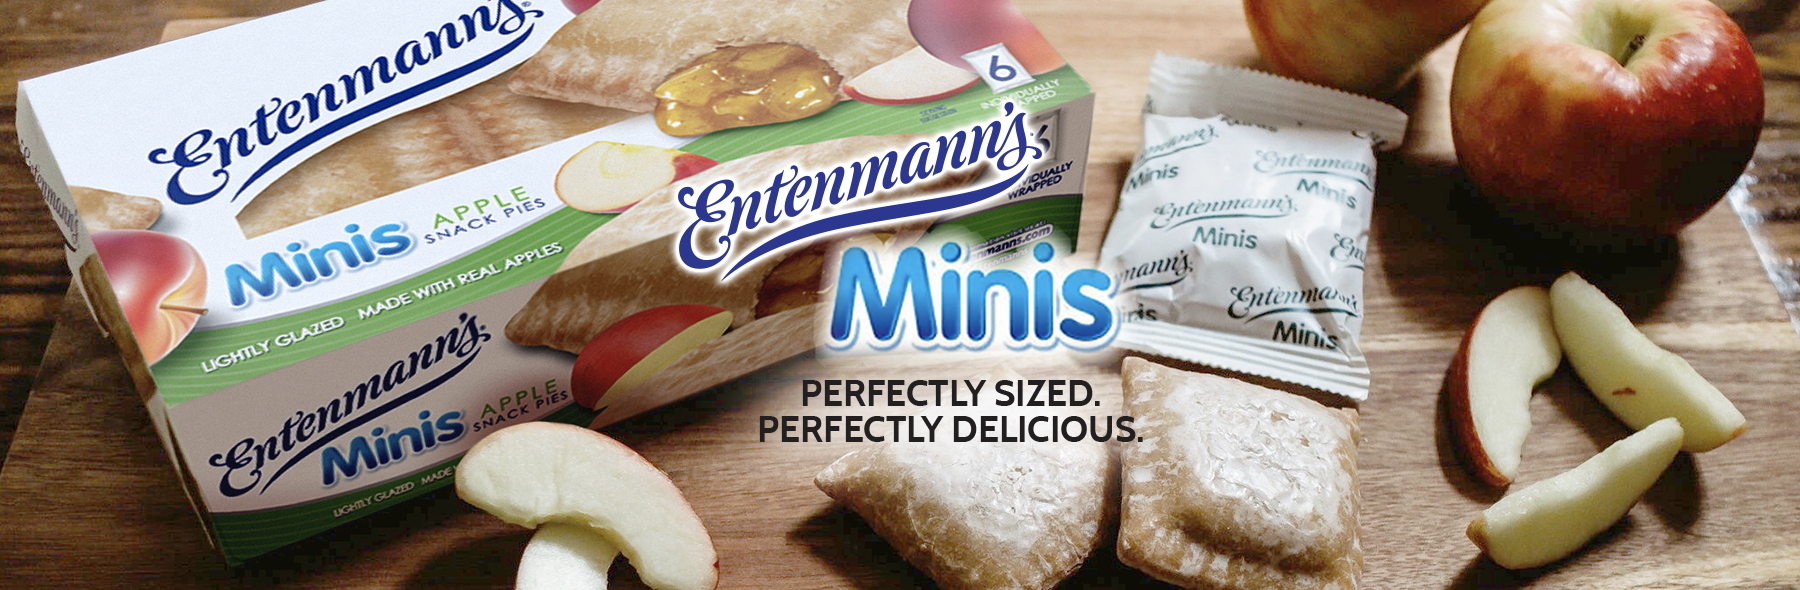 Entenmann's® Minis Perfectly Sized. Perfectly Delicious.